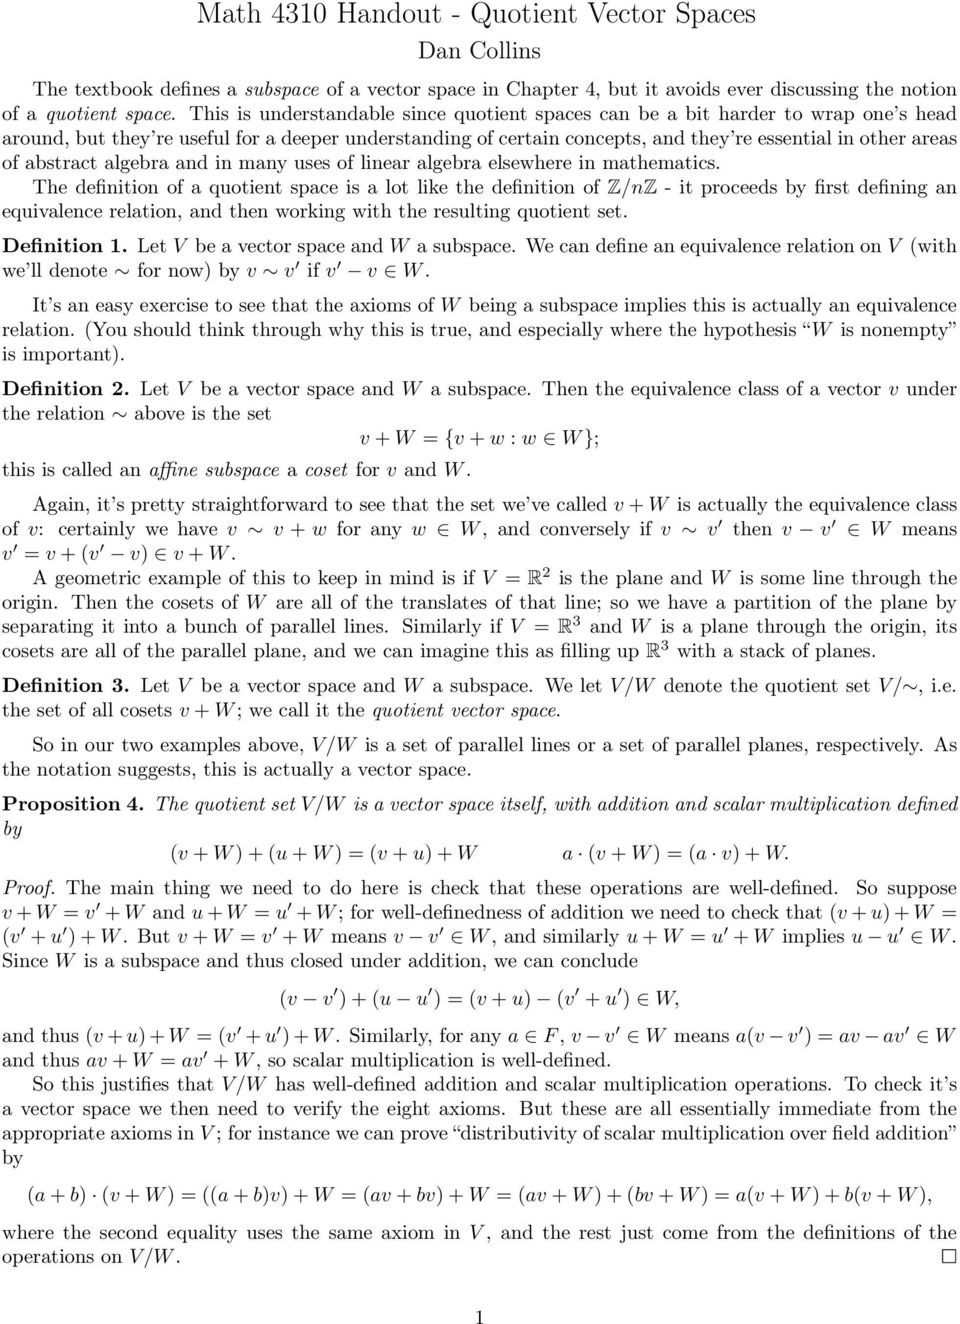 abstract algebra and in many uses of linear algebra elsewhere in mathematics.